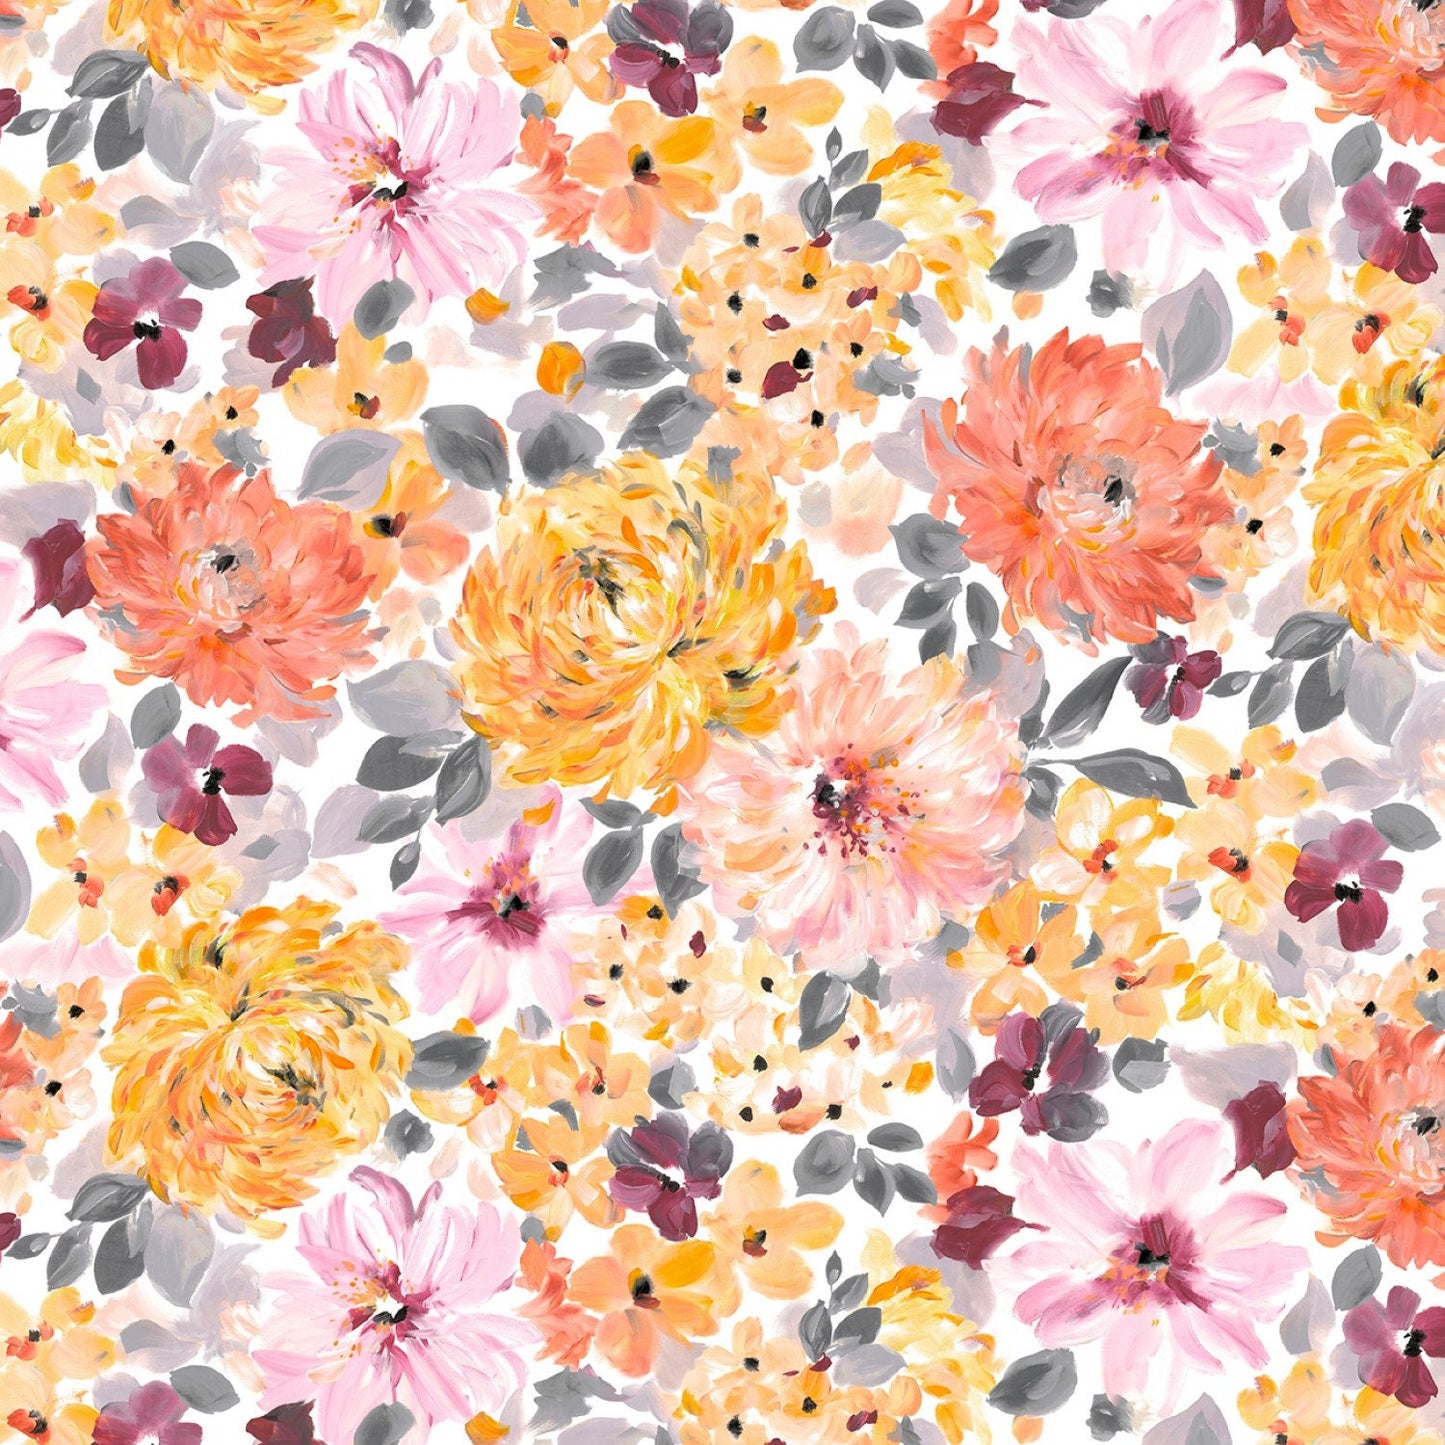 Painted Petals Charm Pack, P & B Textiles PPET5X5, Peach Pink Yellow Floral Quilt Fabric Squares, 5" Inch Precut Fabric Squares